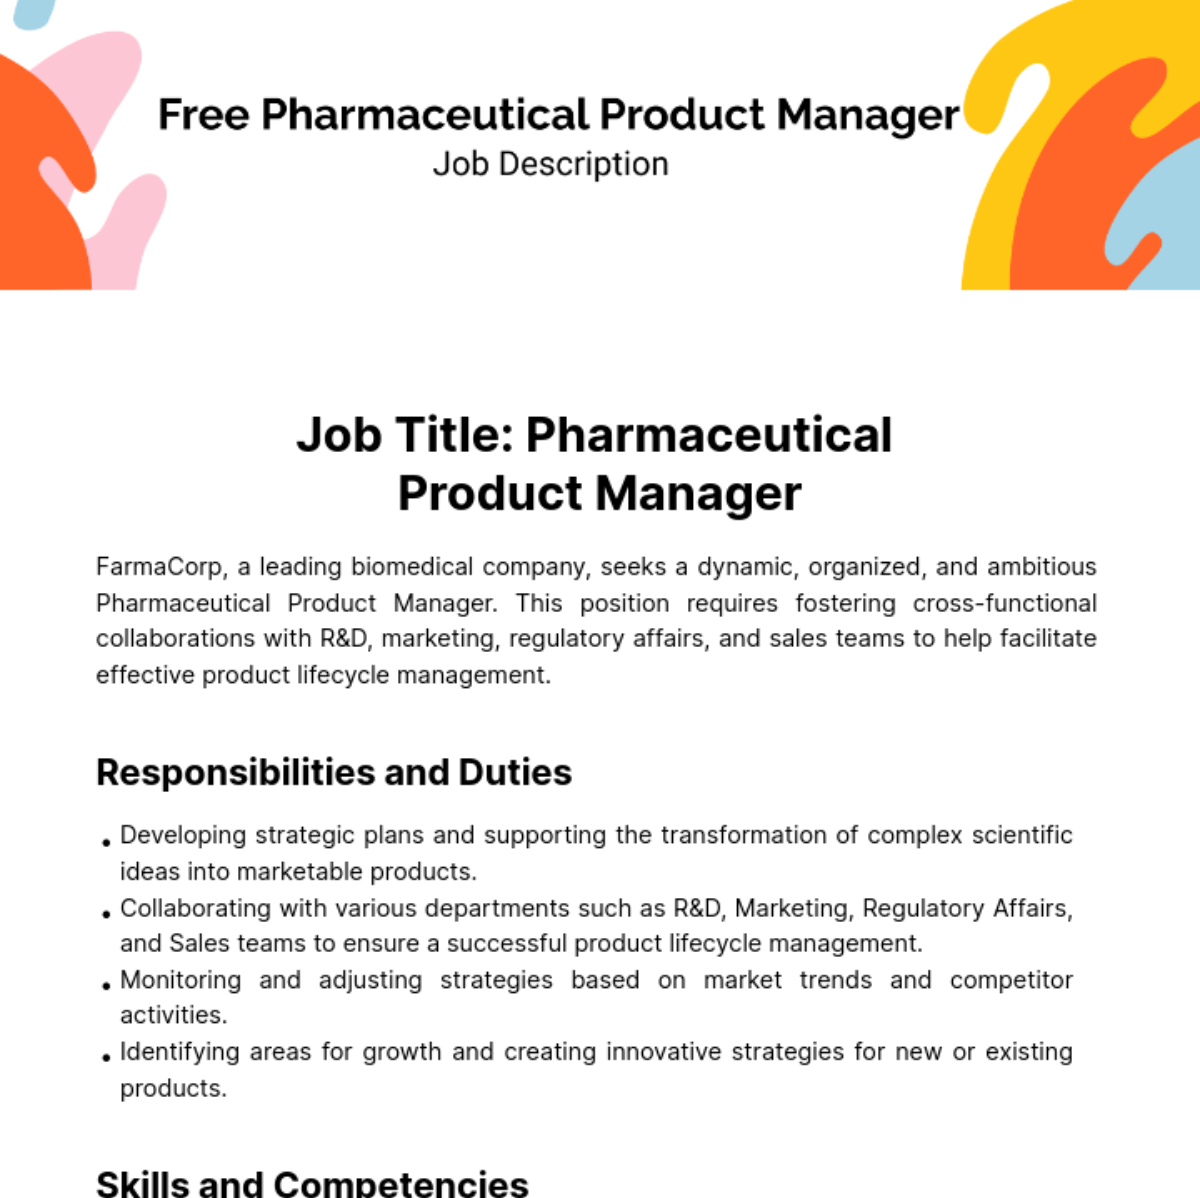 Free Pharmaceutical Product Manager Job Description Template